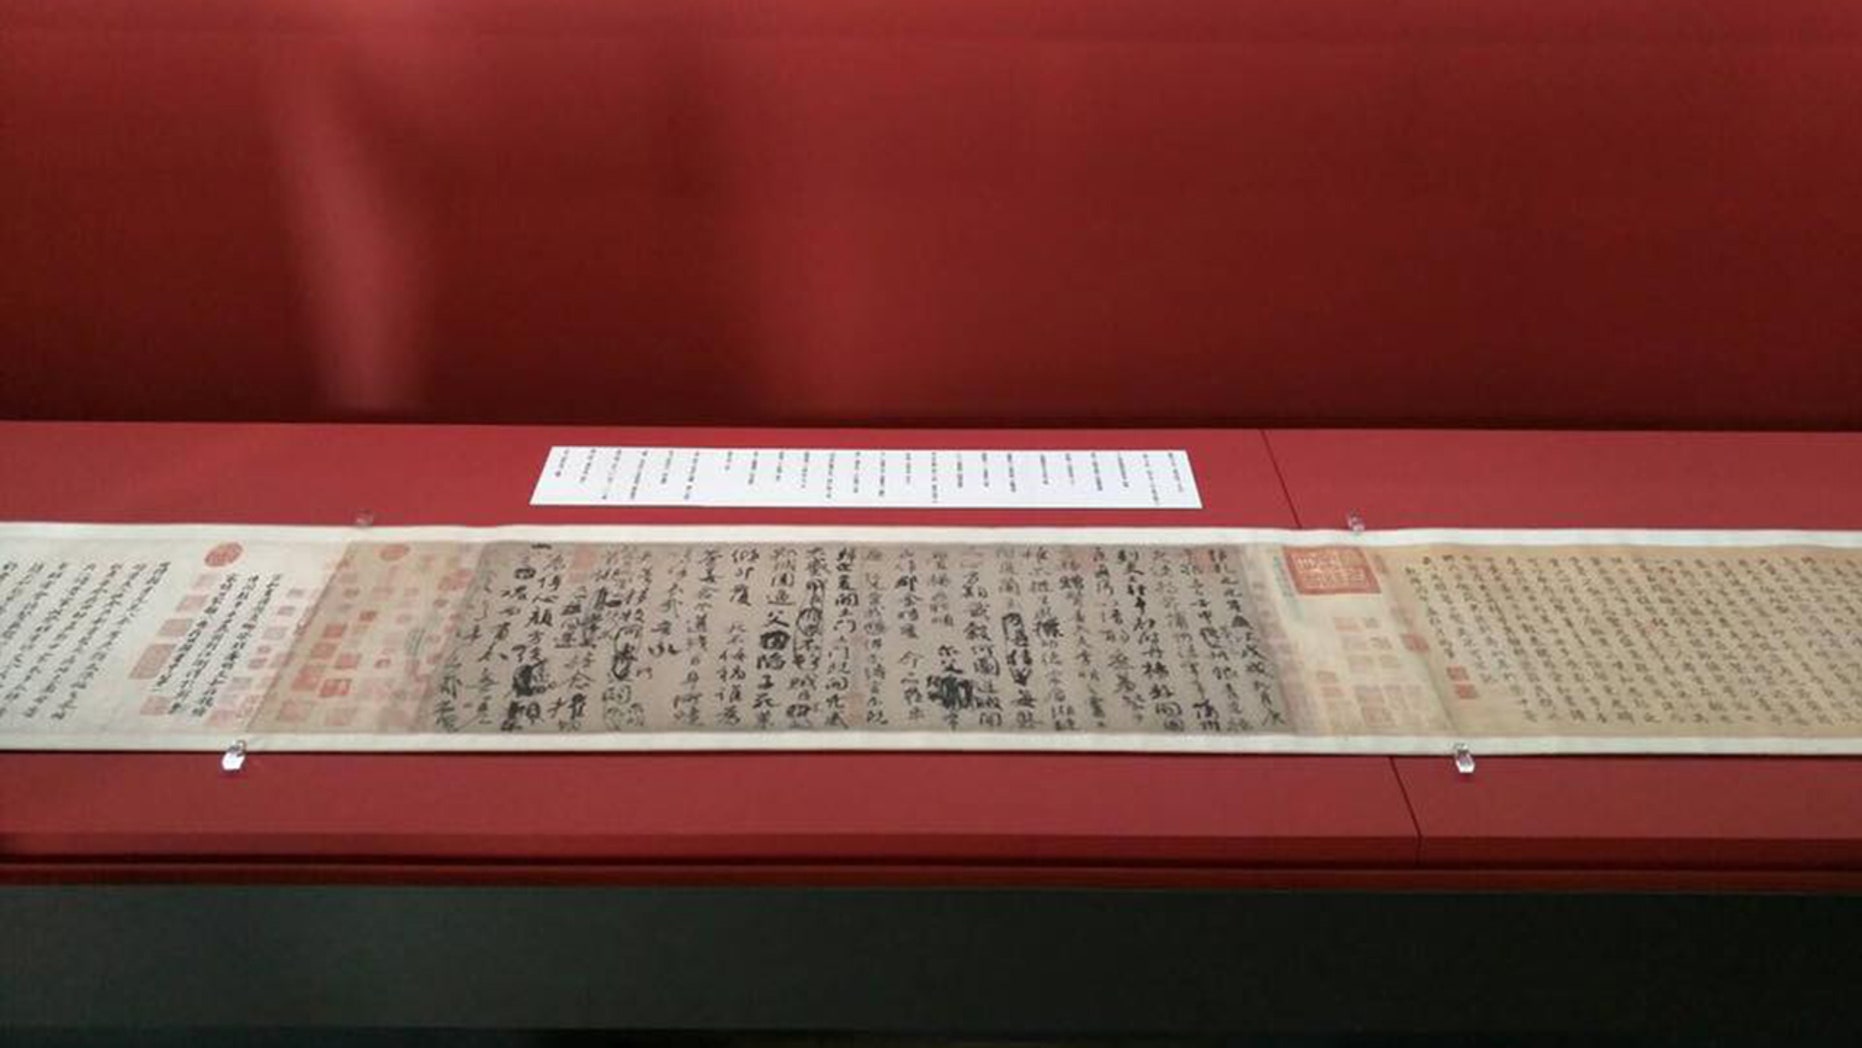 A 1,200-year-old calligraphy masterpiece by renowned calligrapher Yan Zhenqing has sparked outrage in China after news that it would be loaned to a Japan museum was made public.